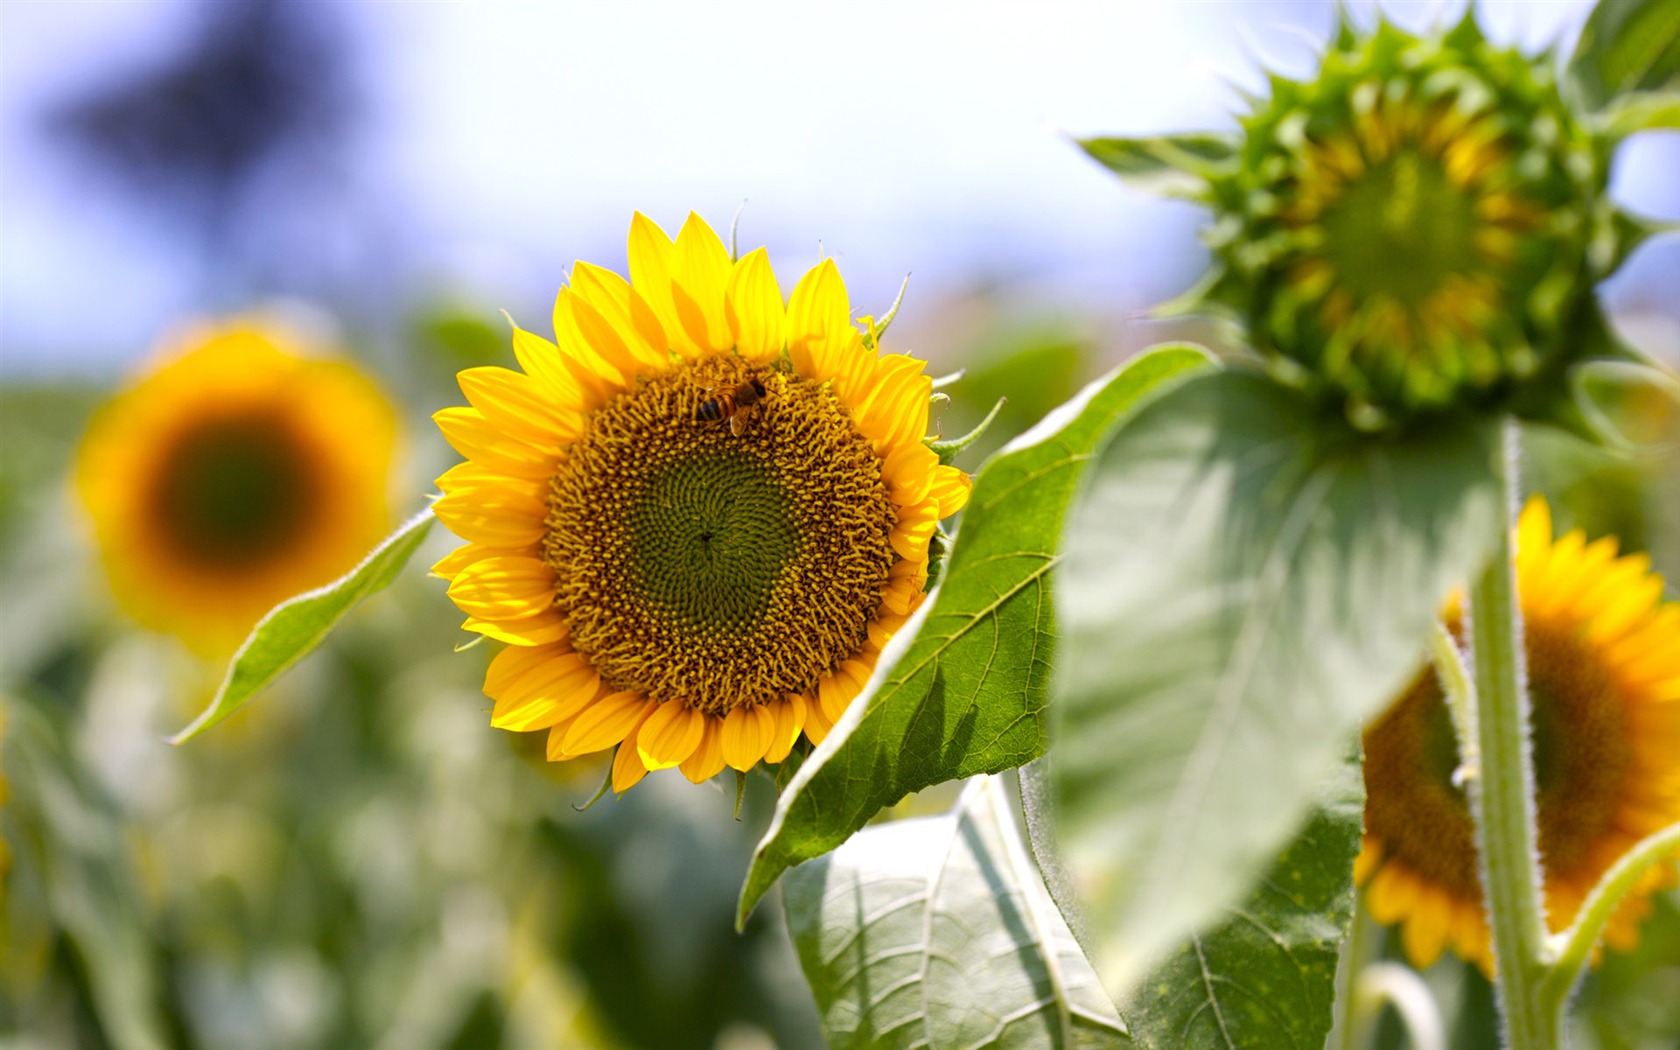 Sunny sunflower photo HD Wallpapers #21 - 1680x1050